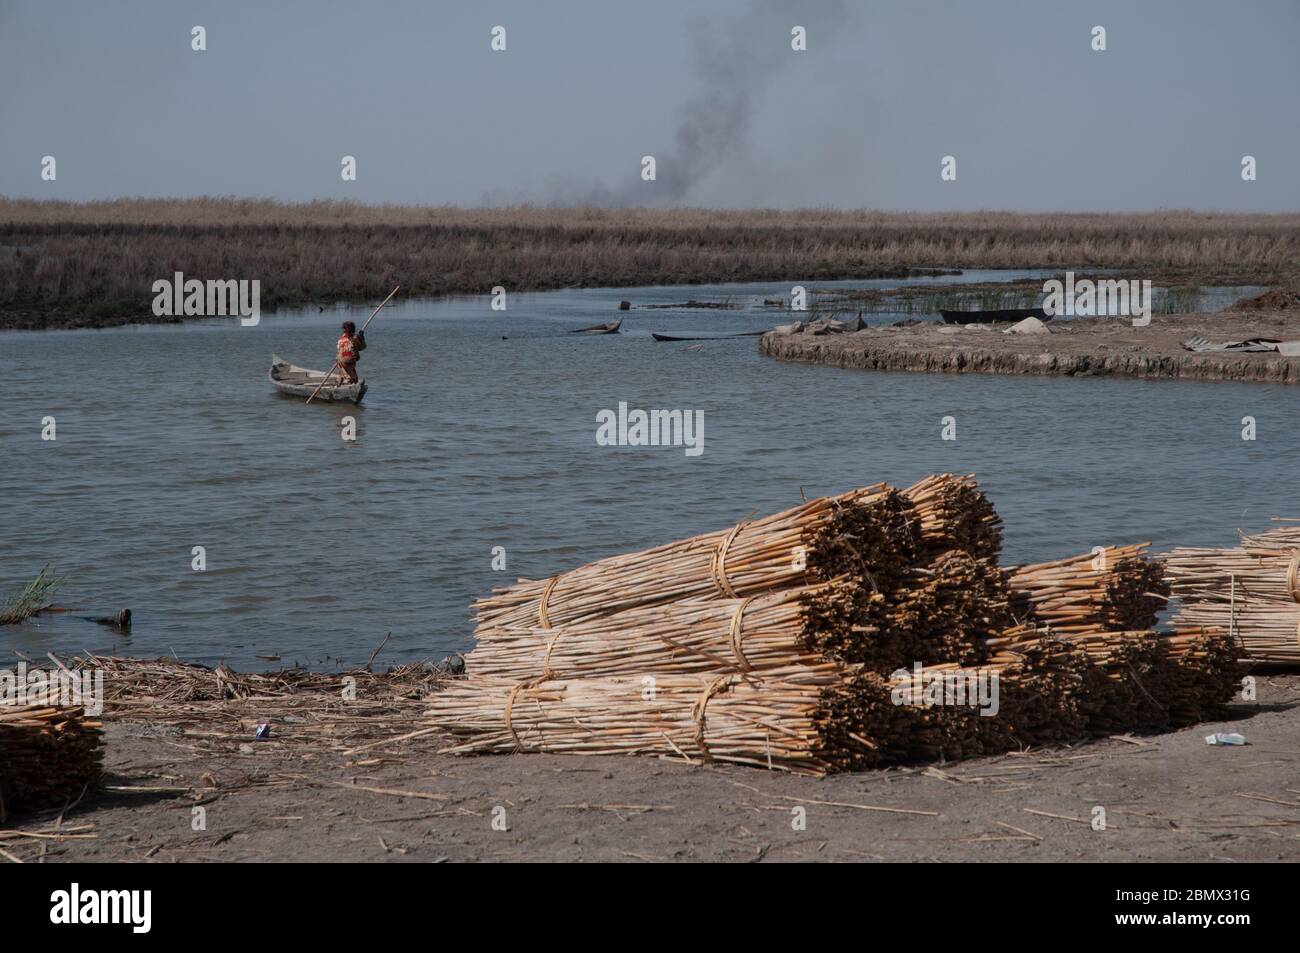 bundles of dried reeds for use in the building of Mudhifs in the marshes of Southern Iraq, by the Marsh Arabs Stock Photo